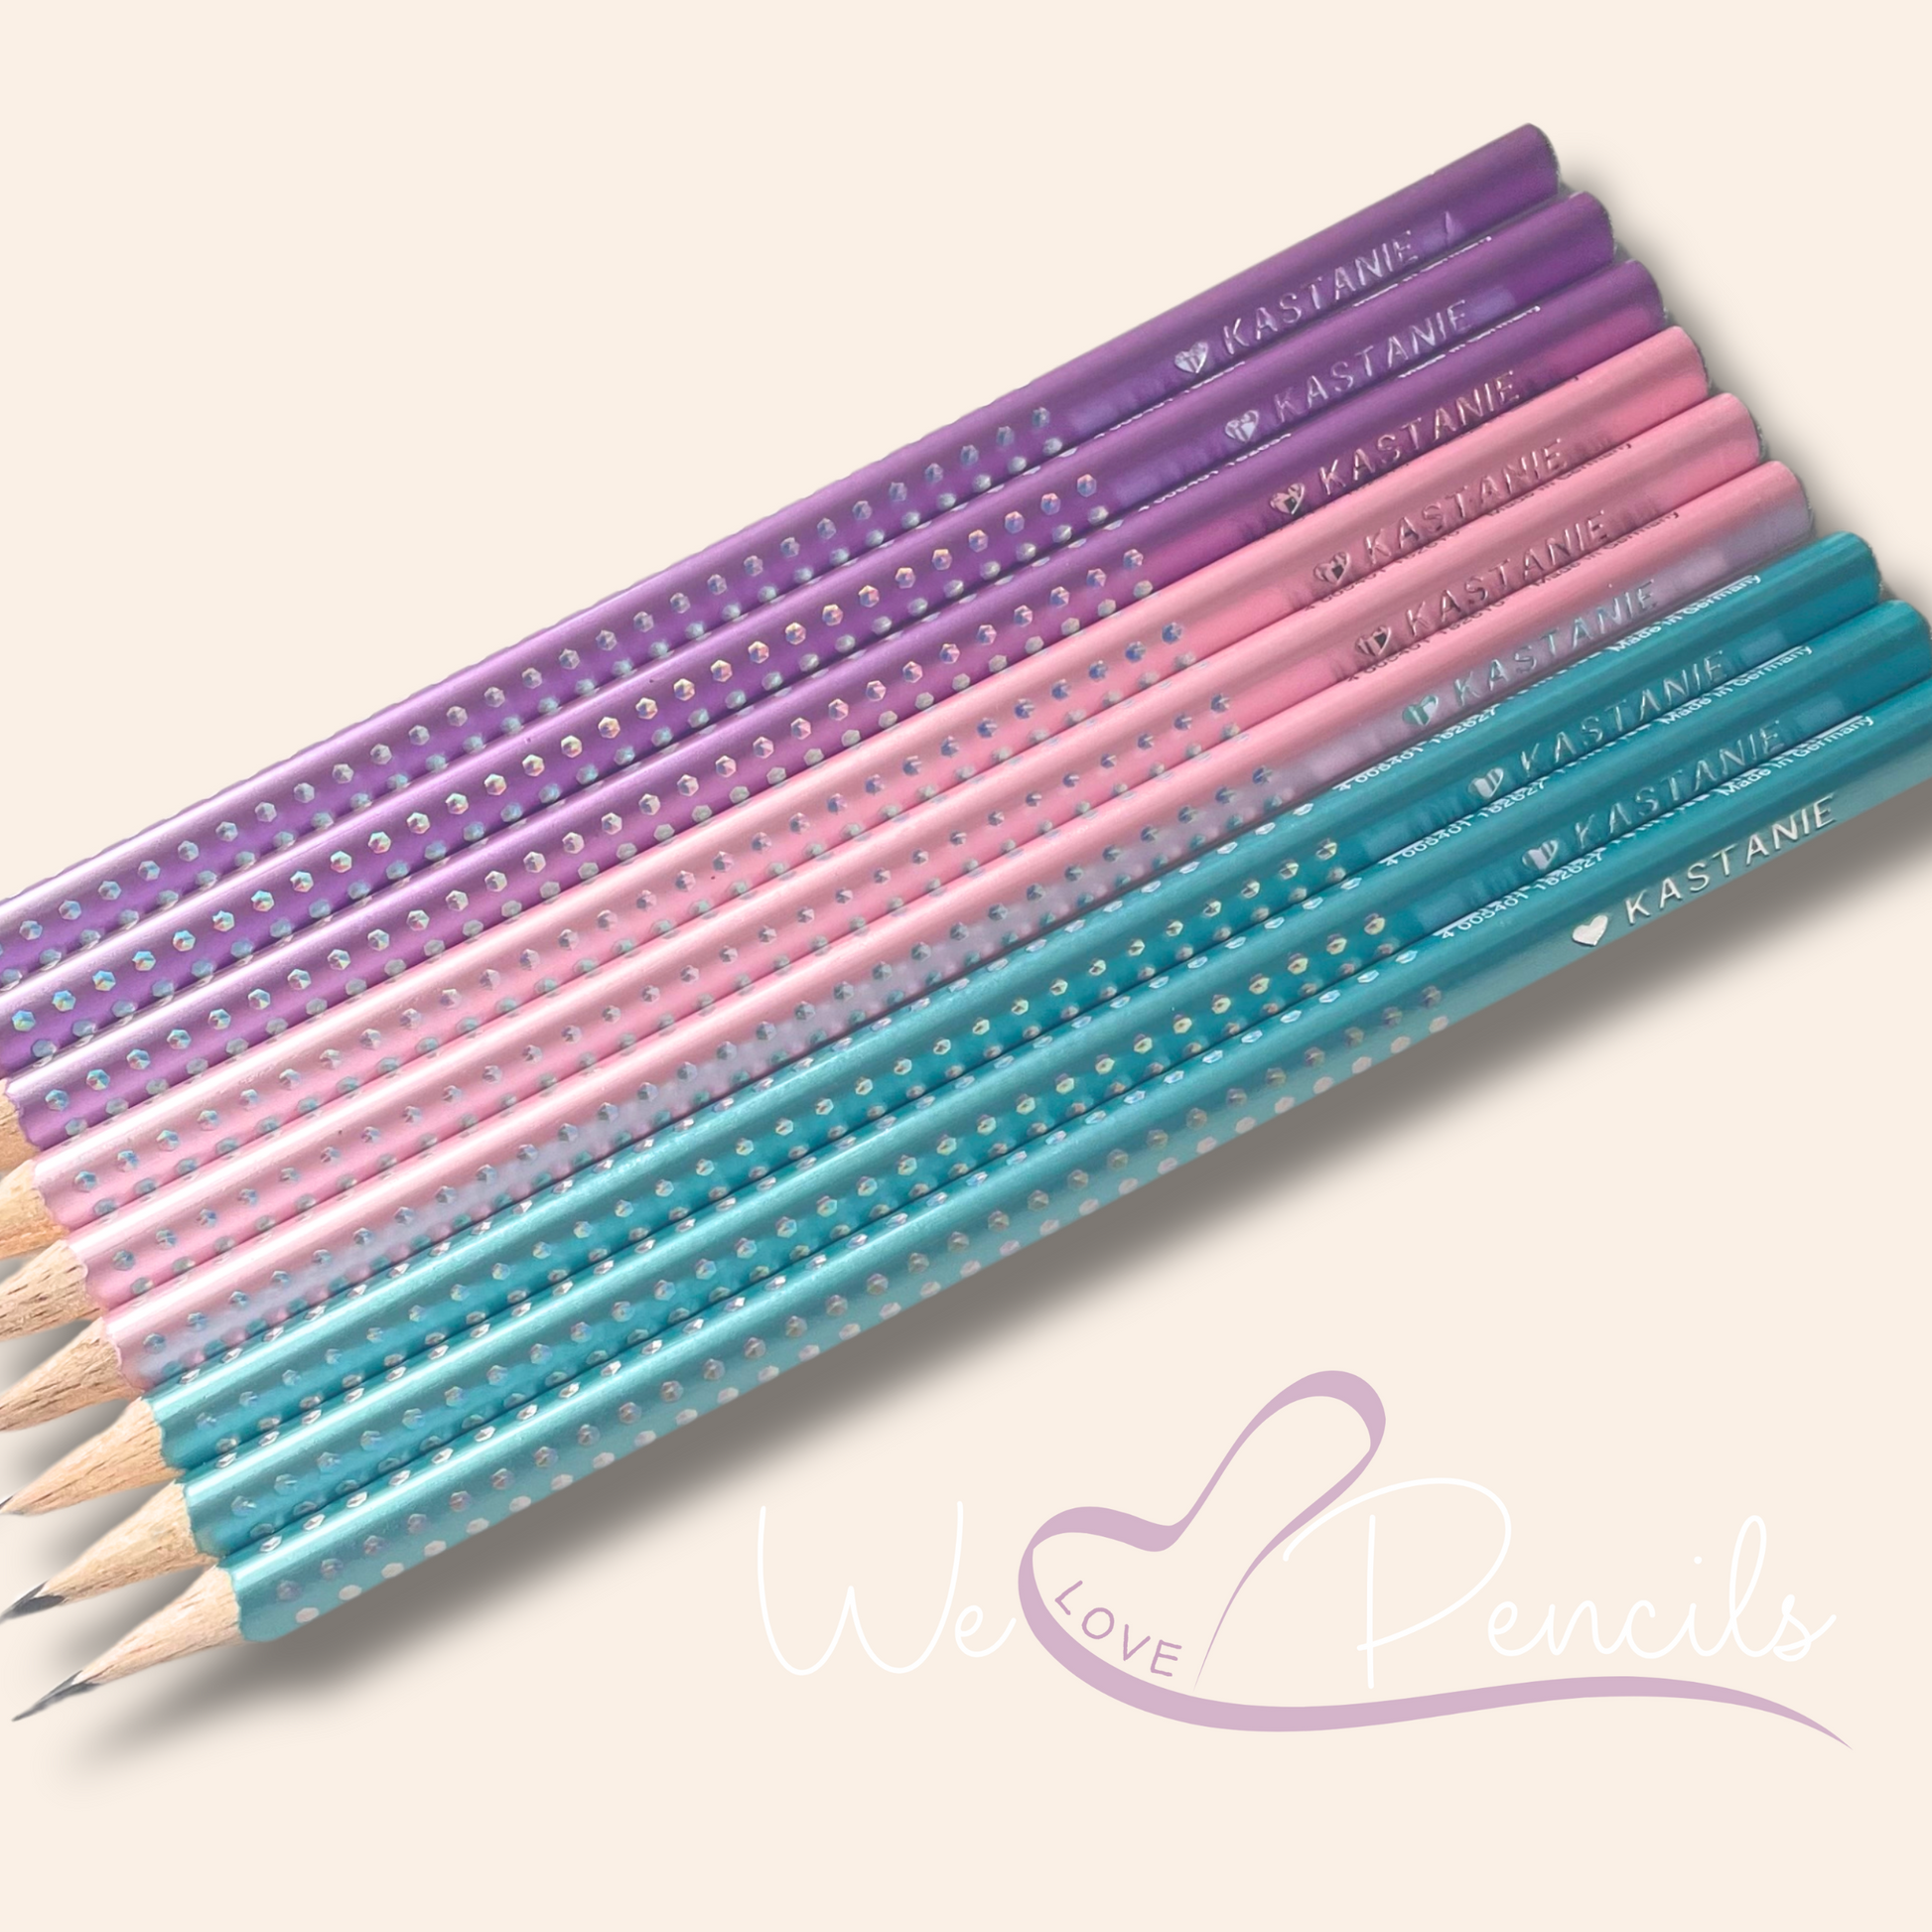 Personalized Faber-Castell Sparkle Edition pencils in metallic hues, customized with names for a unique school supply.